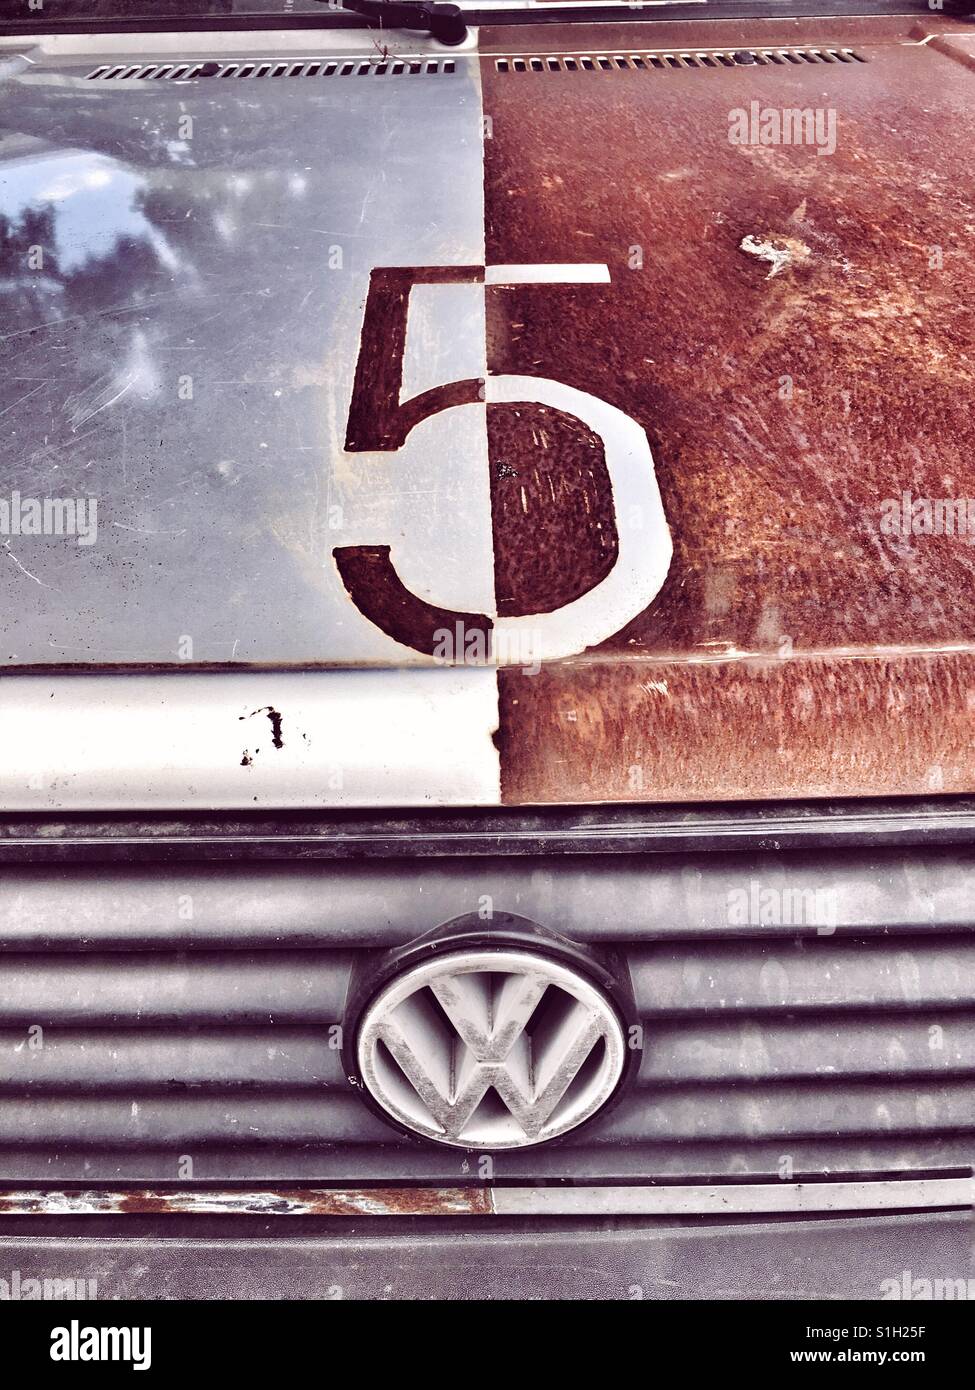 The hood of a vintage Volkswagen Golf with a number 5 written on it Stock Photo